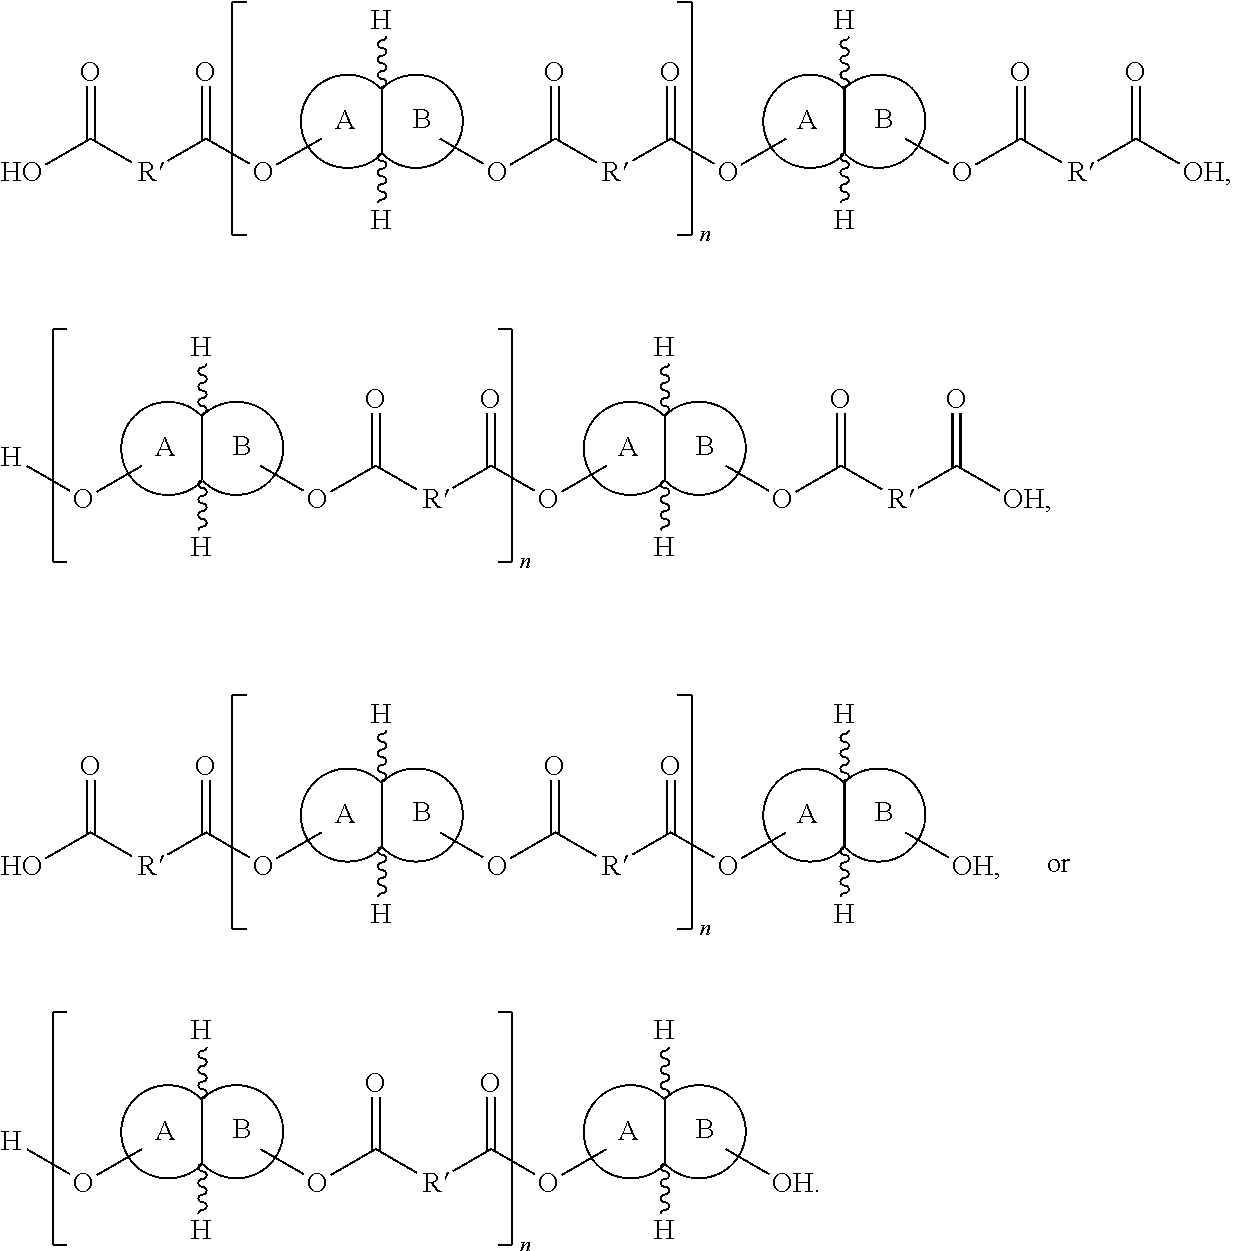 Polymers and methods of making the same